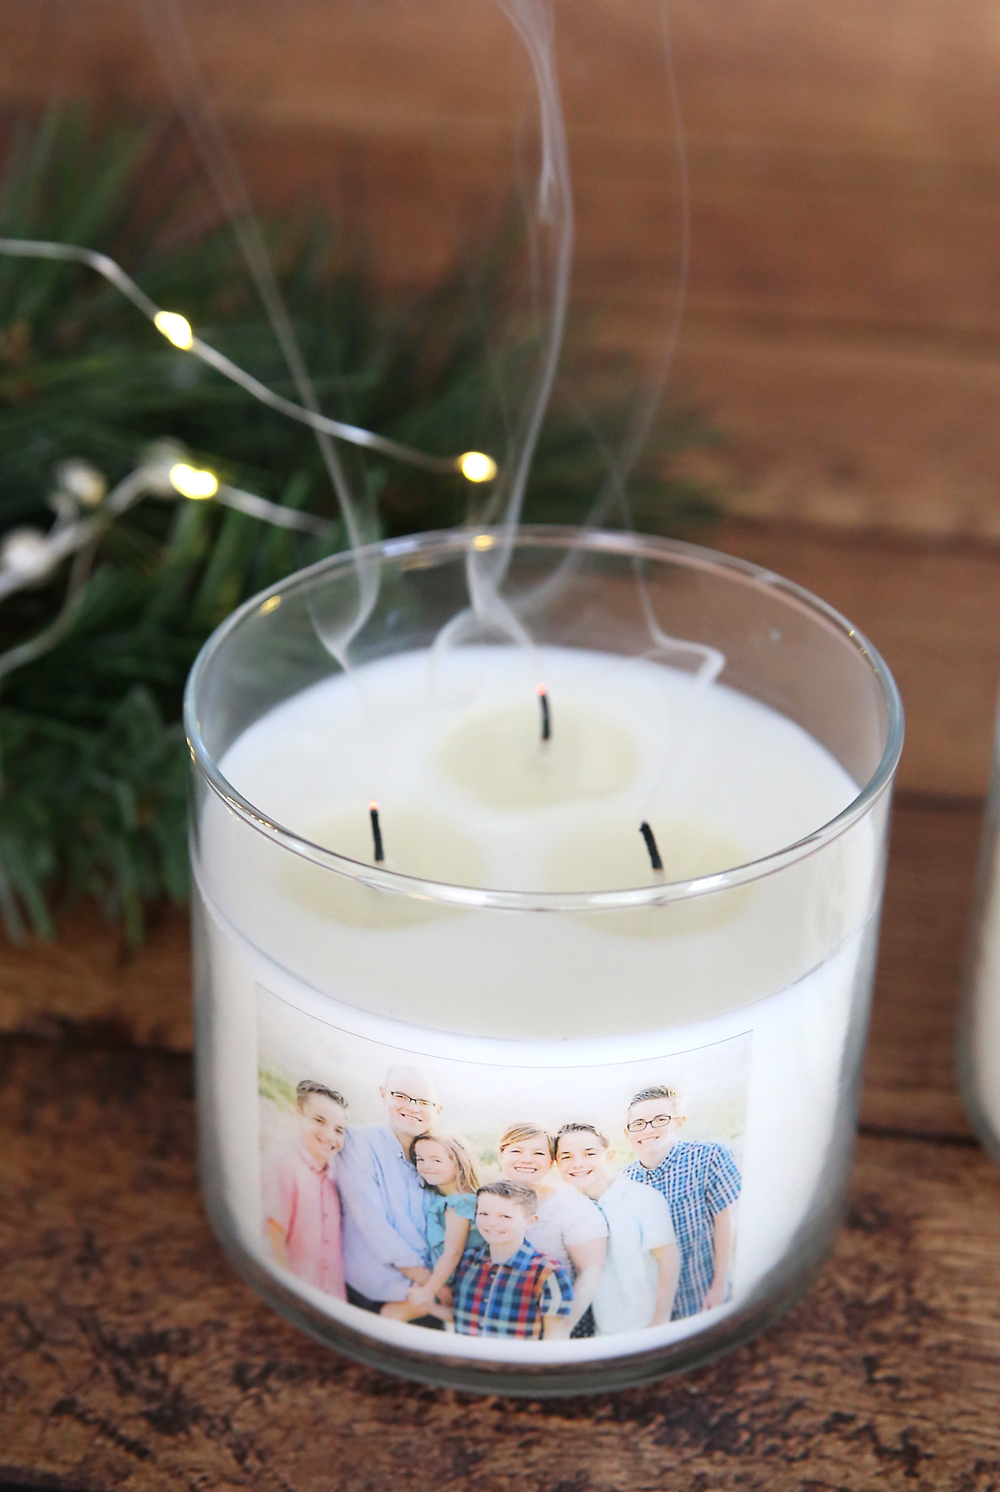 Personalized photo candle that has just been blown out; smoke coming from wicks